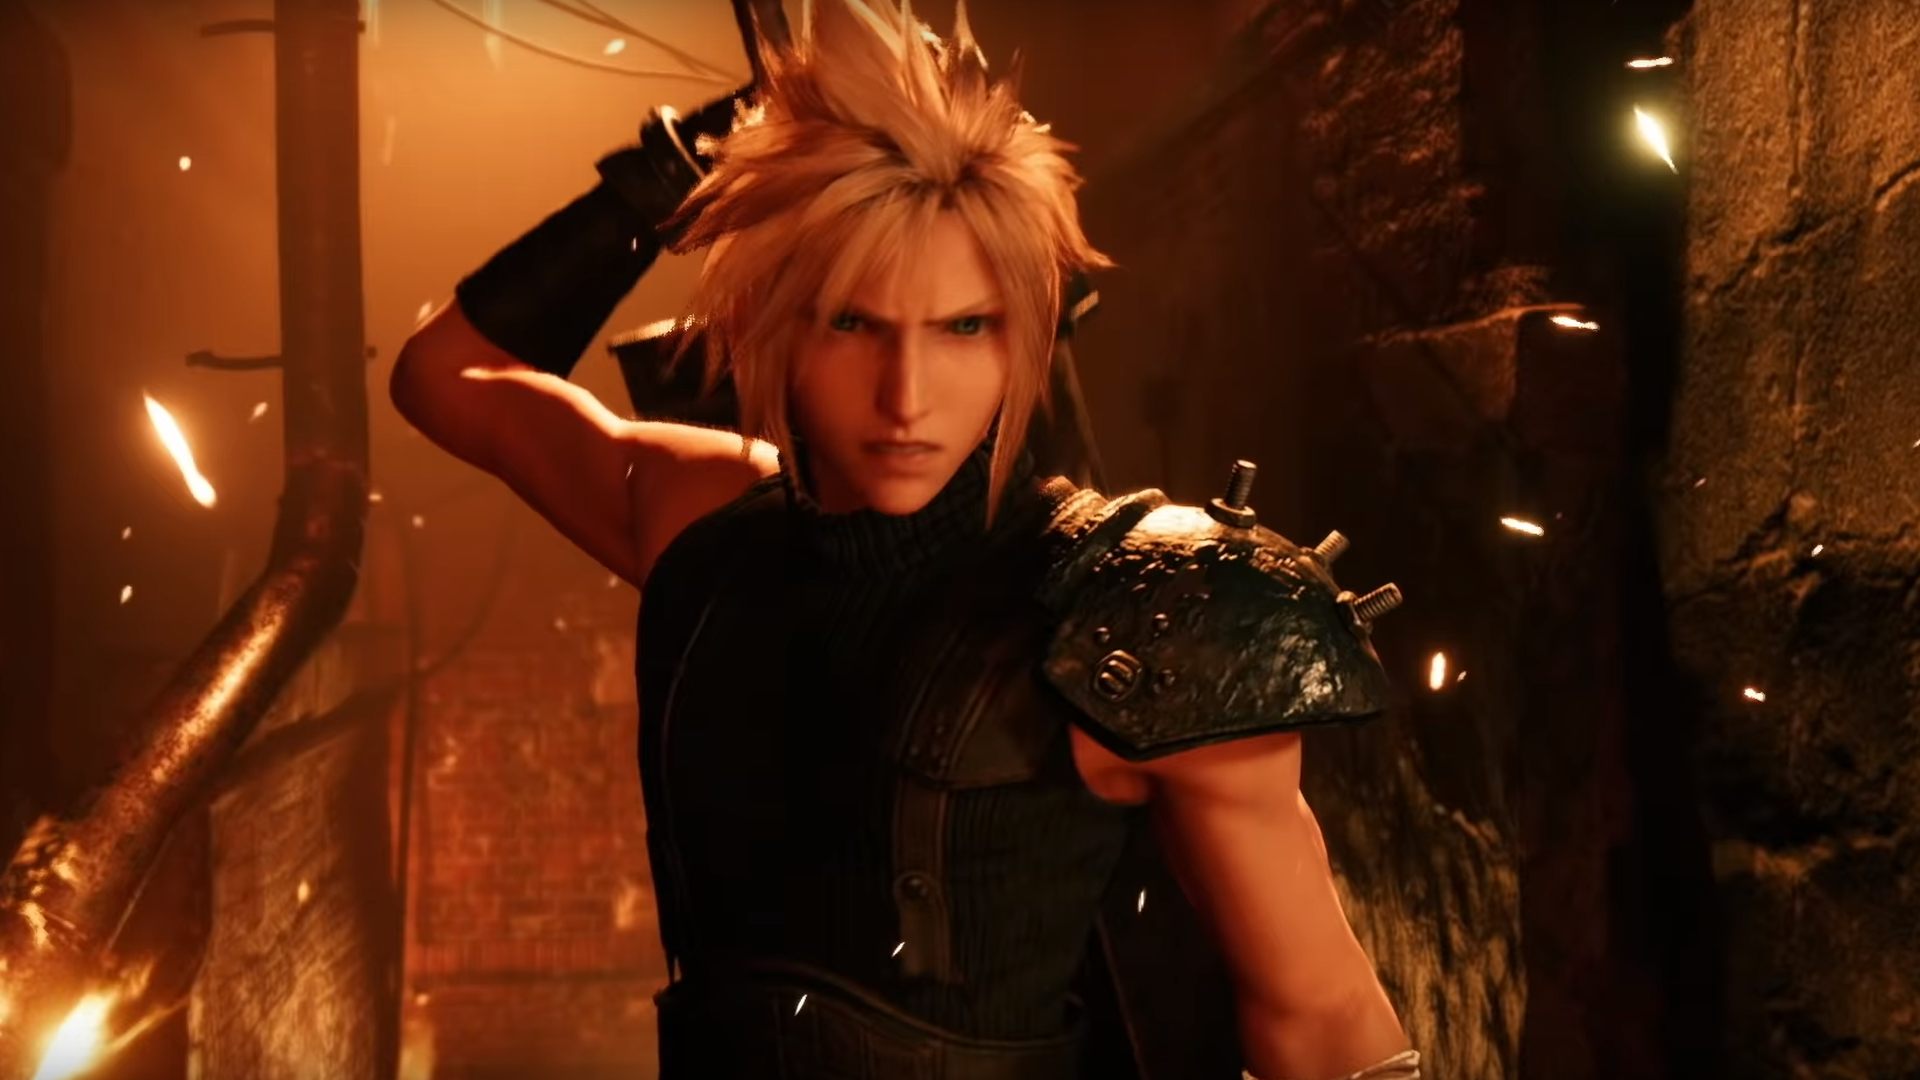 Final Fantasy 7 Rebirth is bigger, bolder, and better than the